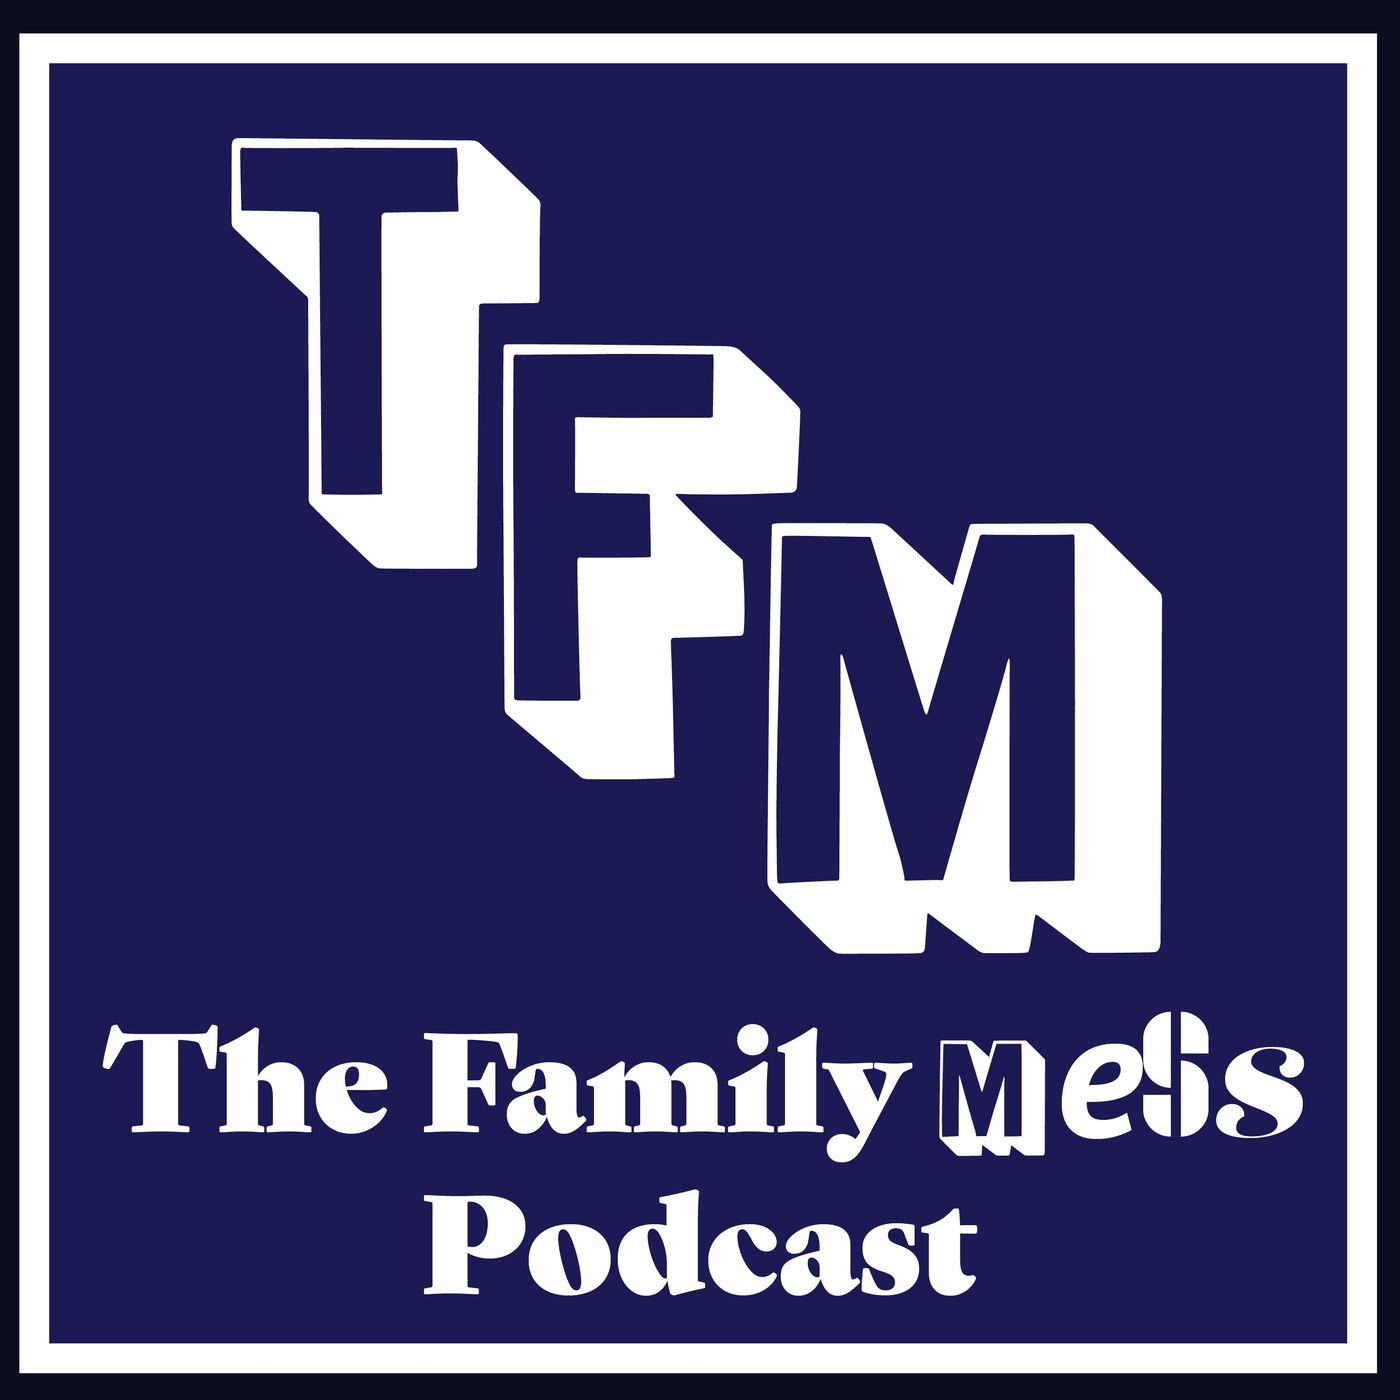 The Family Mess Podcast